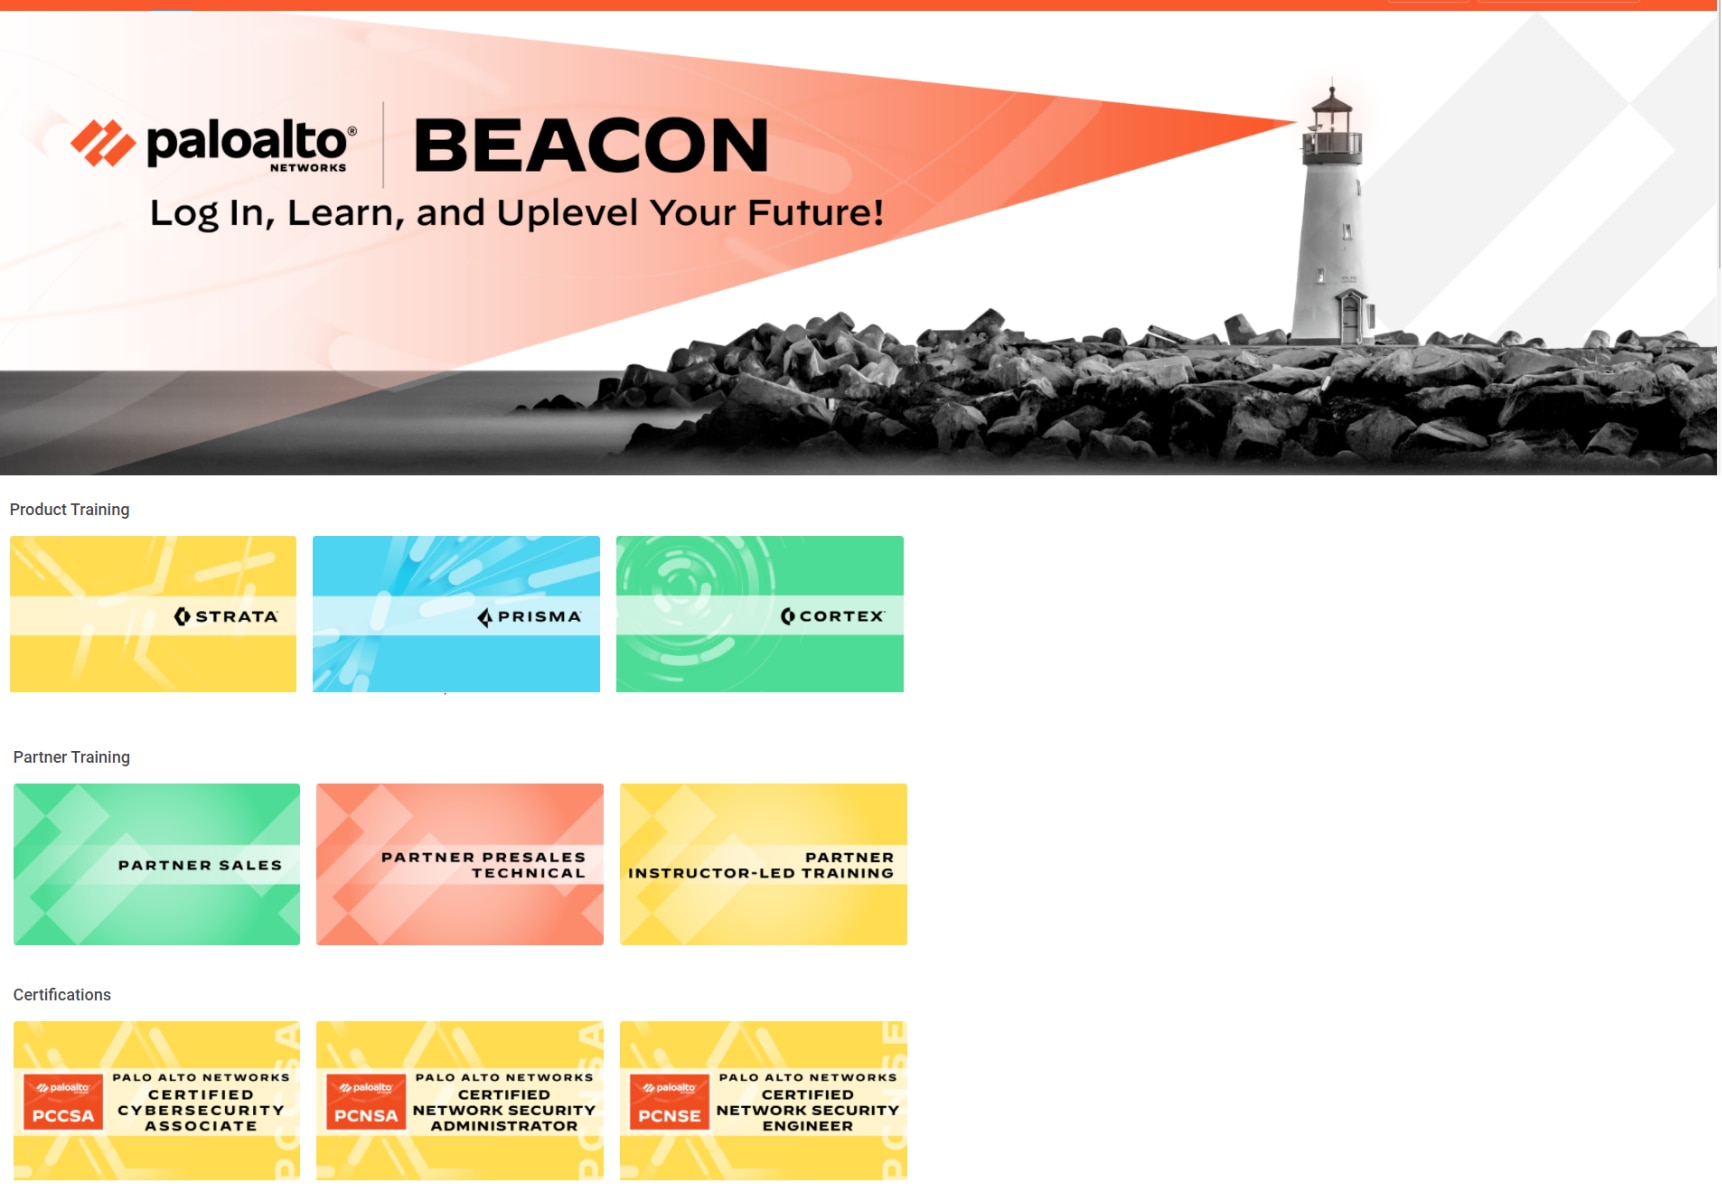 Log in, learn and uplevel your future with Beacon. We've moved all customer and partner learning onto Beacon, as shown here, to make it a truly centralized location to access digital learning, instructor-led training and certification. 